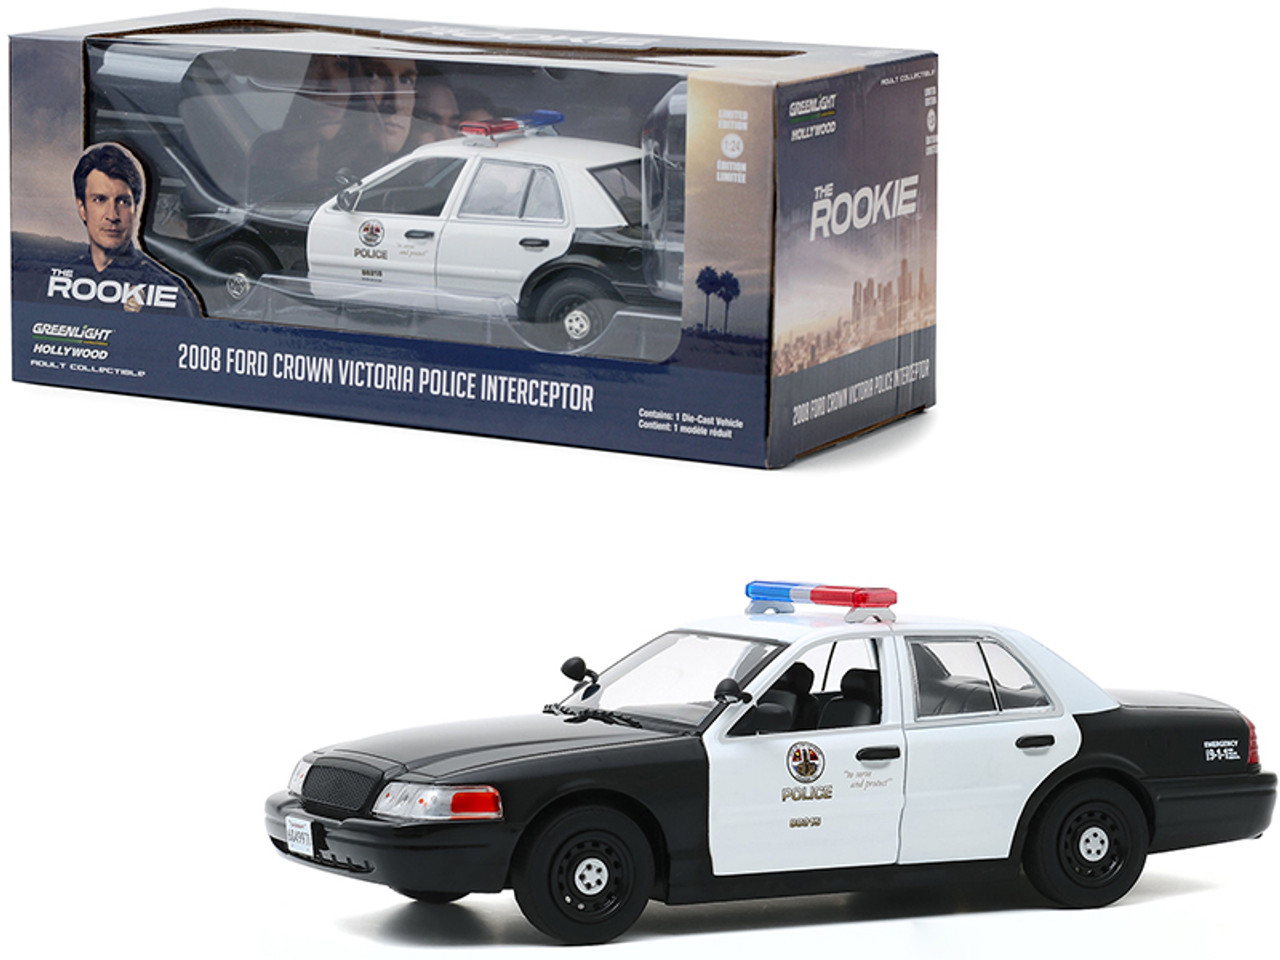 2008 Ford Crown Victoria Police Interceptor White and Black "LAPD" (Los Angeles Police Department) "The Rookie" (2018) TV Series 1/24 Diecast Model Car by Greenlight